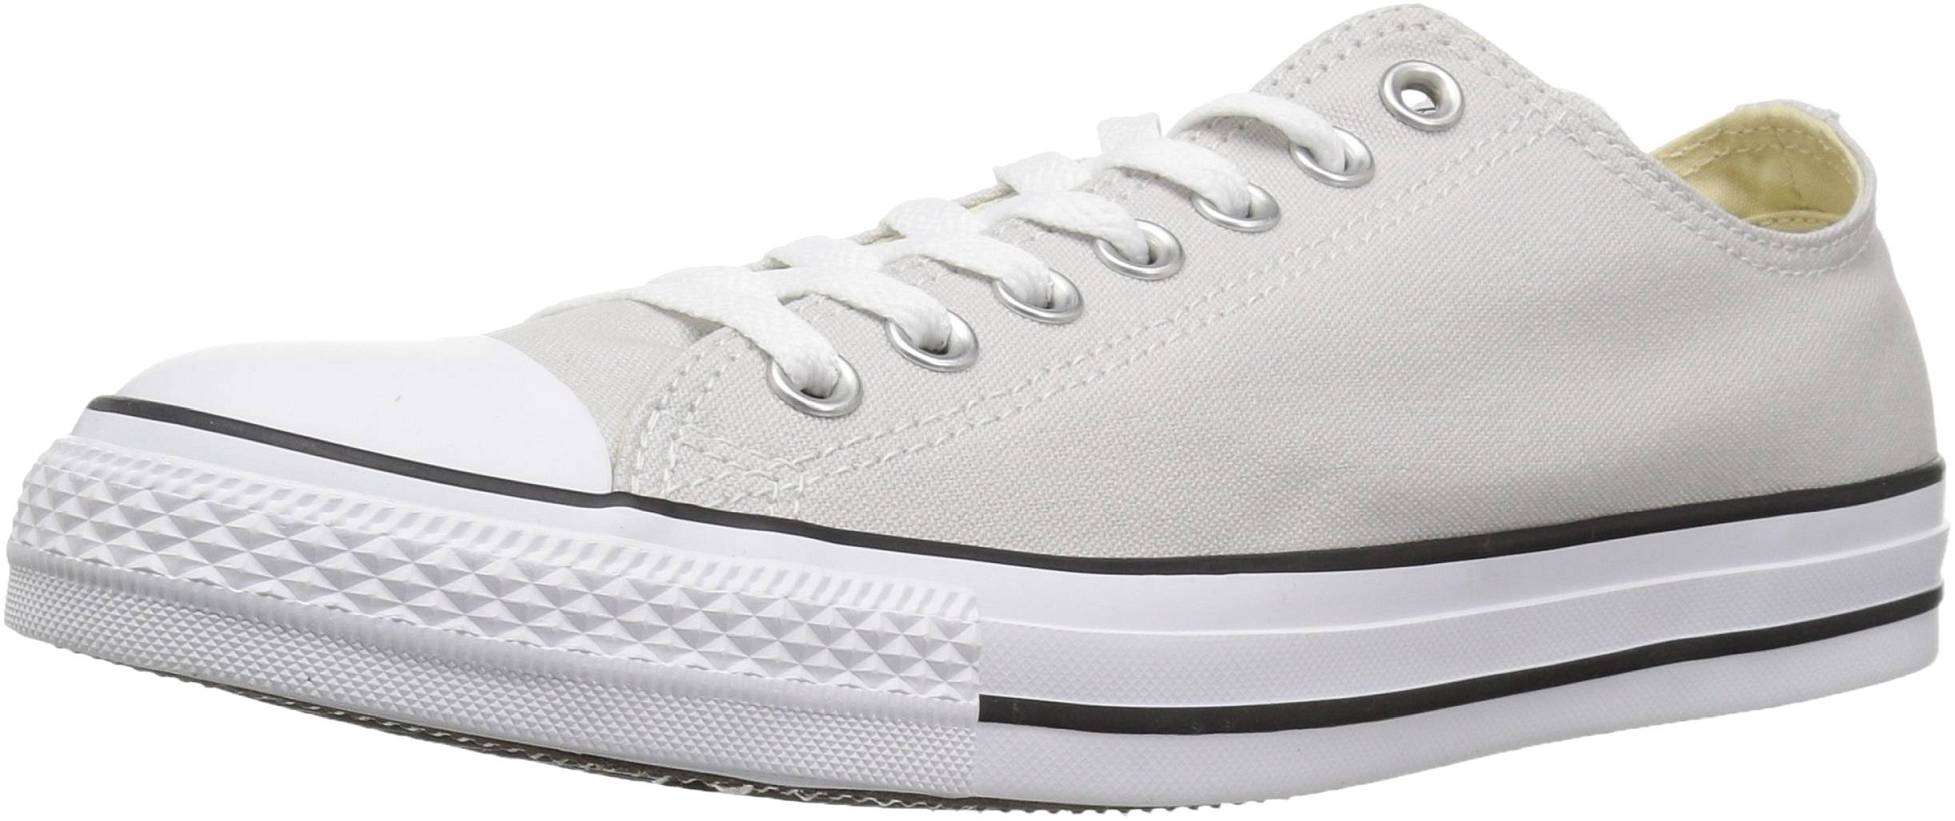 Chuck Taylor All Star Seasonal Colors Low Top color